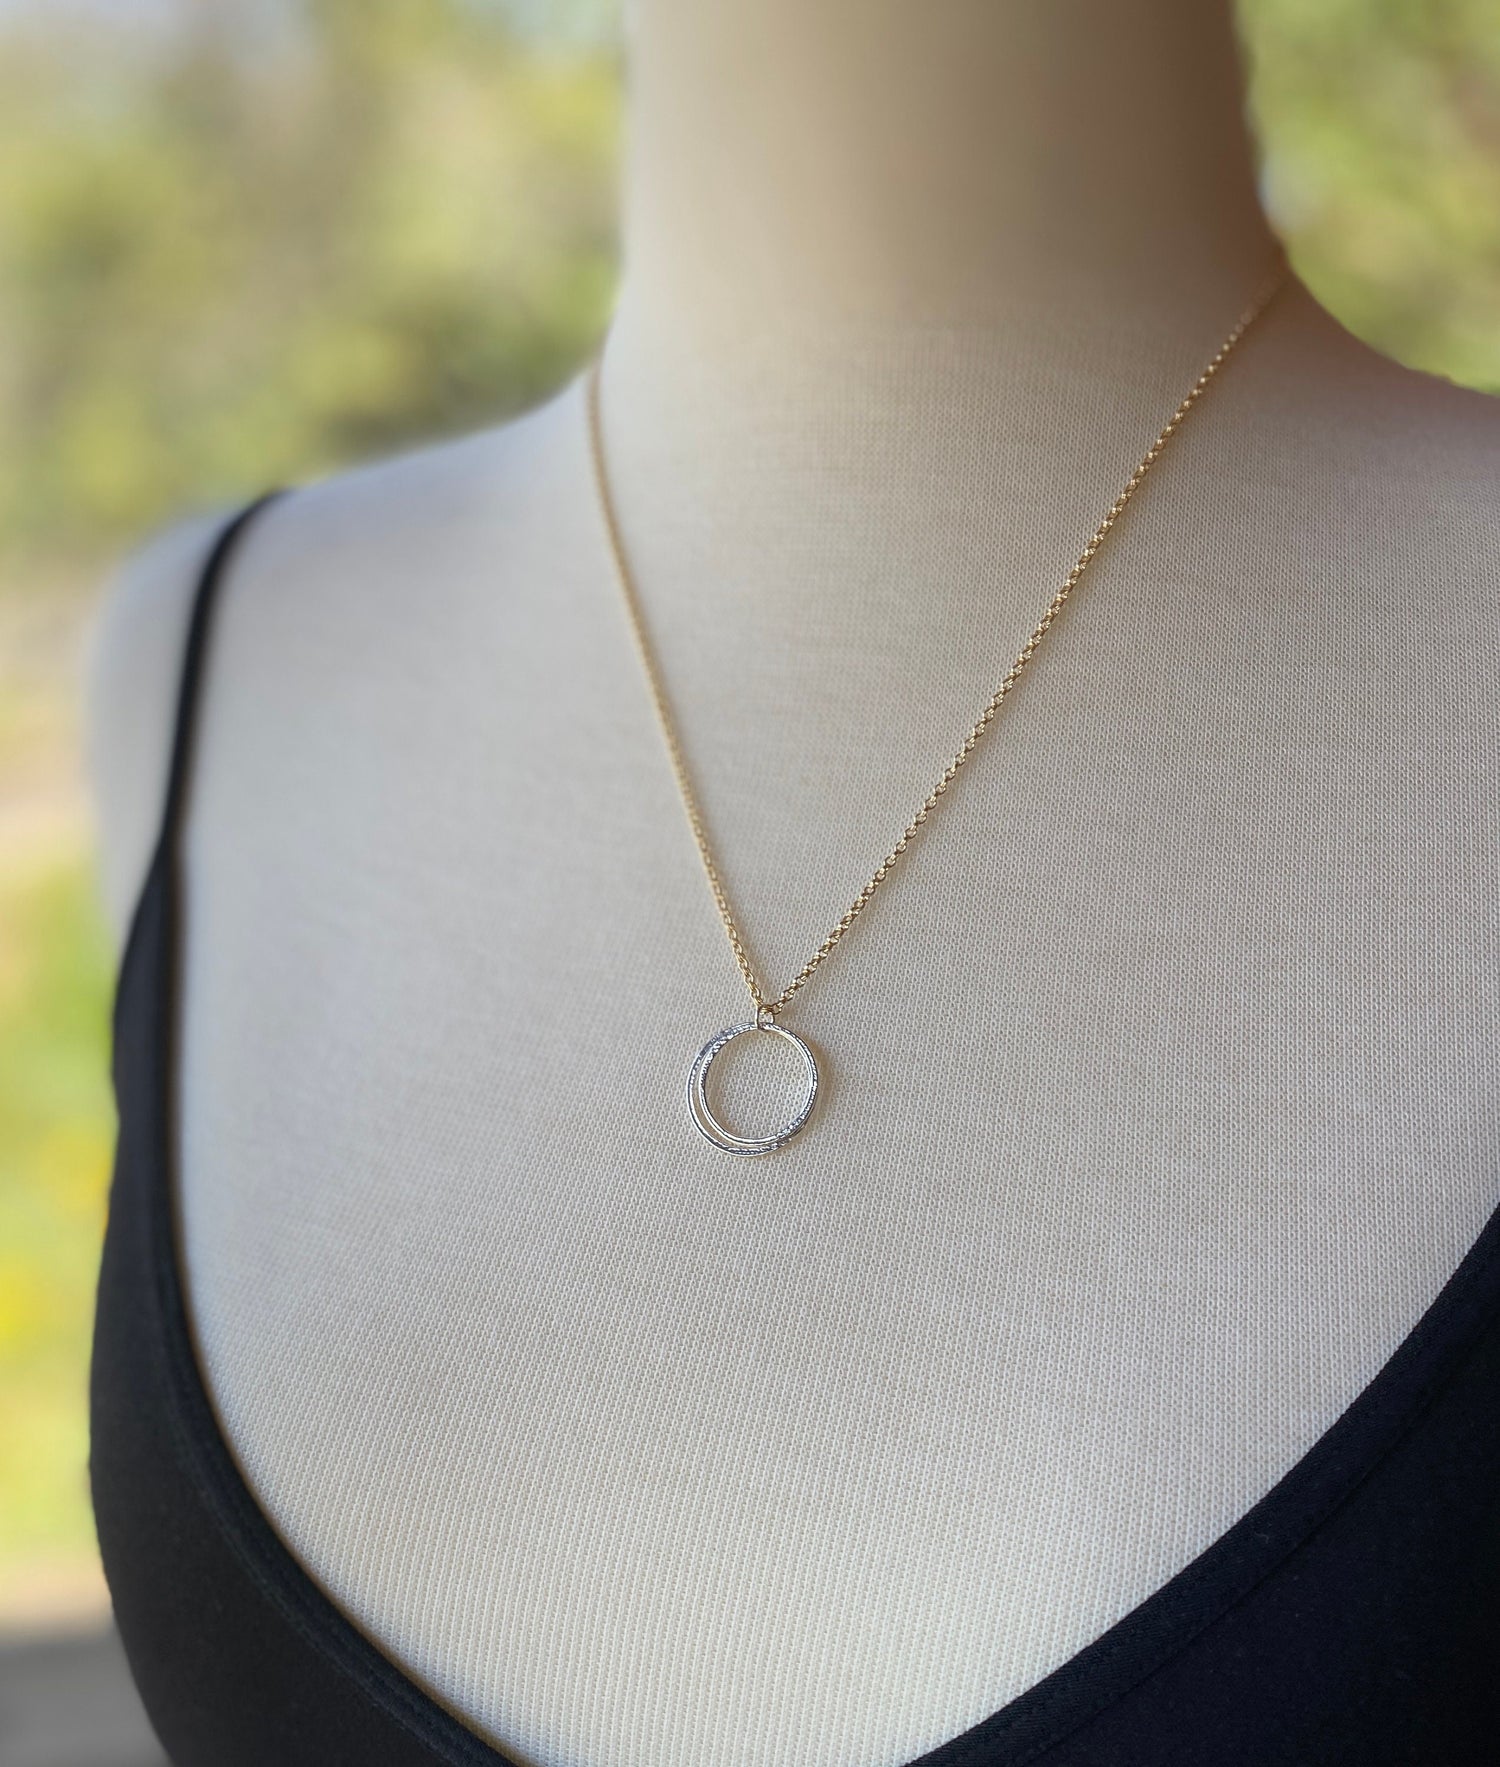 30th Mixed Metal Mid Size Milestone Birthday Necklace, Handcrafted Perfectly Imperfect Sterling Silver Sparkly Circles Pendant on Gold Chain